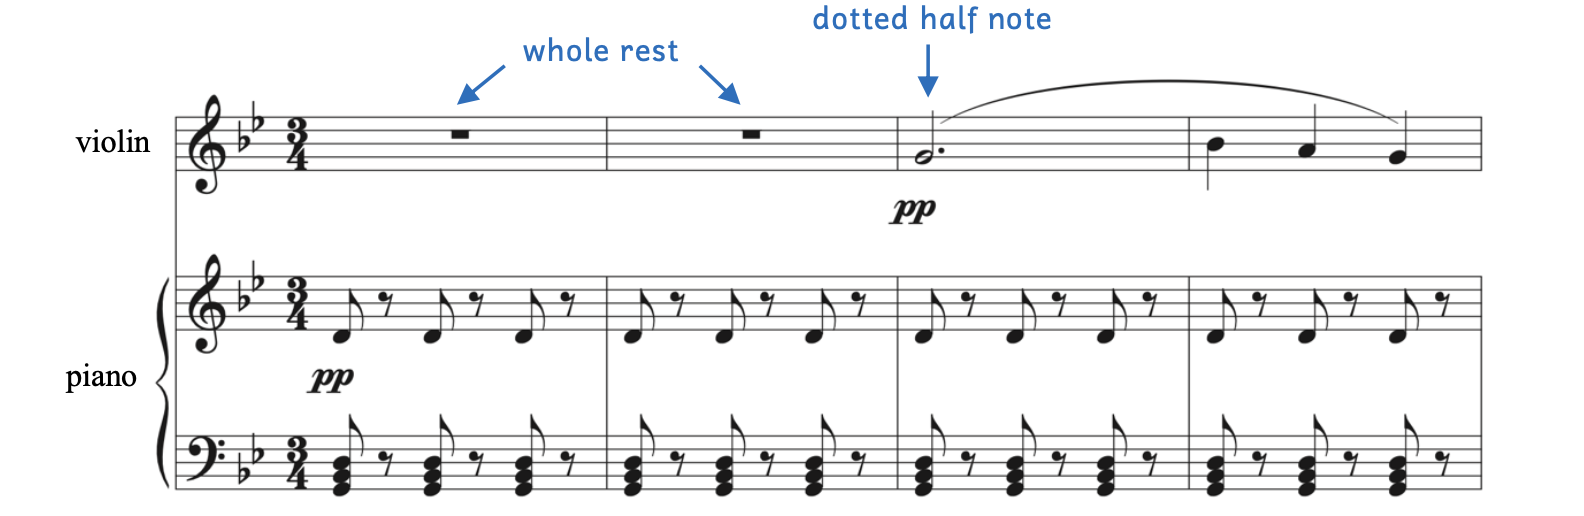 Bertin's Piano Trio, Op. 10, Largo shows how a whole rest fills an entire measure in 3-4 but a dotted half note fills an entire measure.